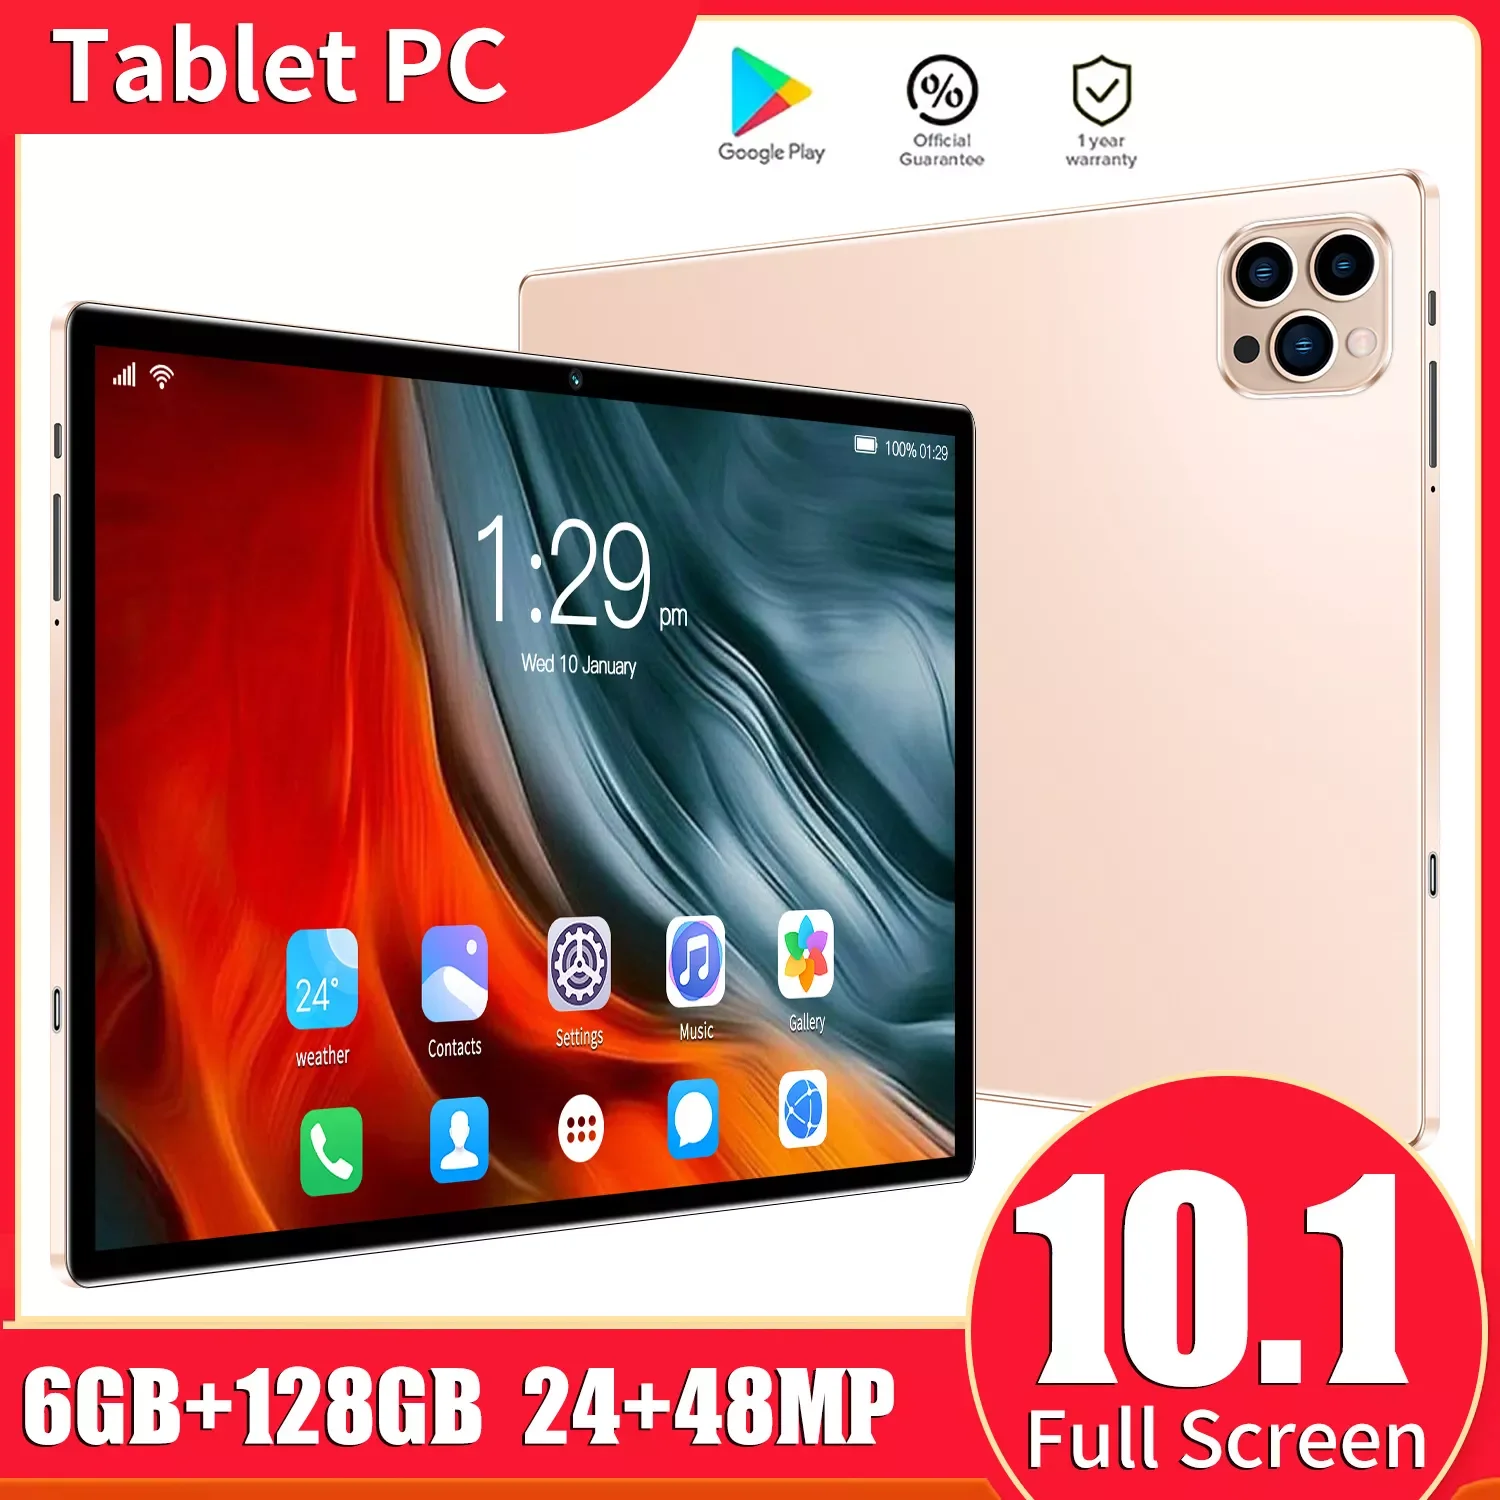 Pad Air 10.1 inch 1200×800 Unisoc T618 Octa Core Processor 8GB RAM 128GB ROM Tablet Android 11 Type-C 8000mAh Battery